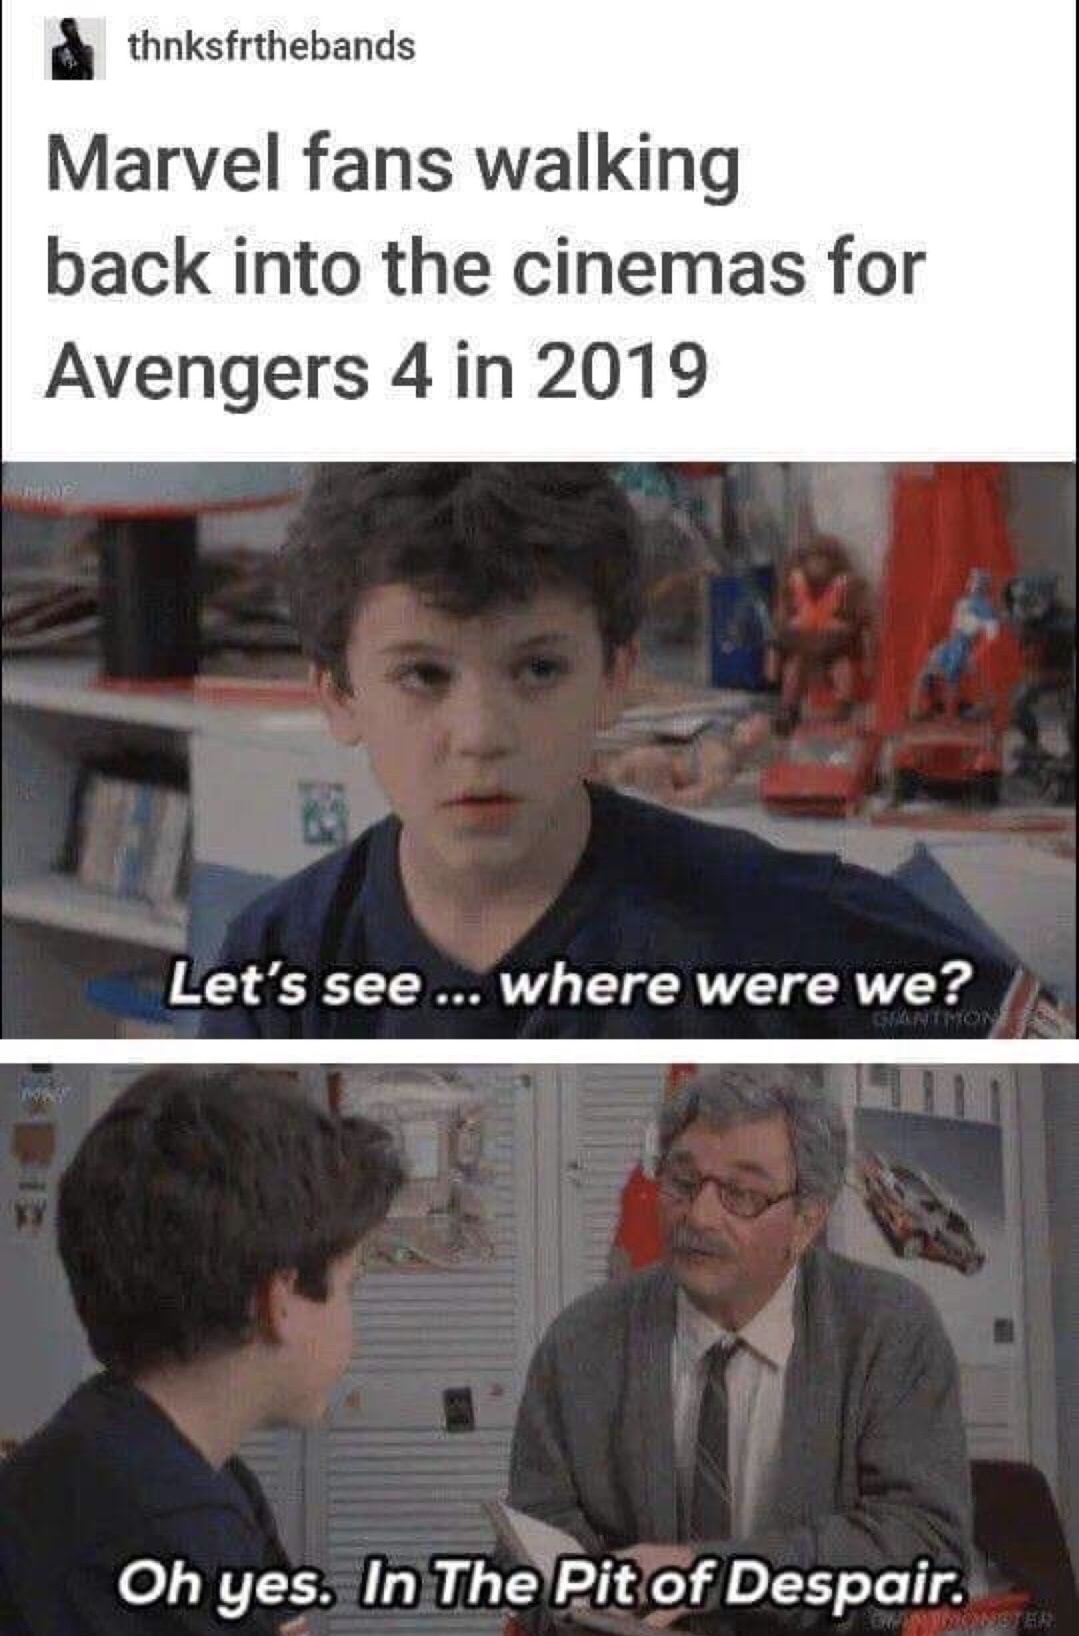 meme we re in the endgame now meme - thnksfrthebands Marvel fans walking back into the cinemas for Avengers 4 in 2019 Let's see ... where were we? Gammon Oh yes. In The Pit of Despair.